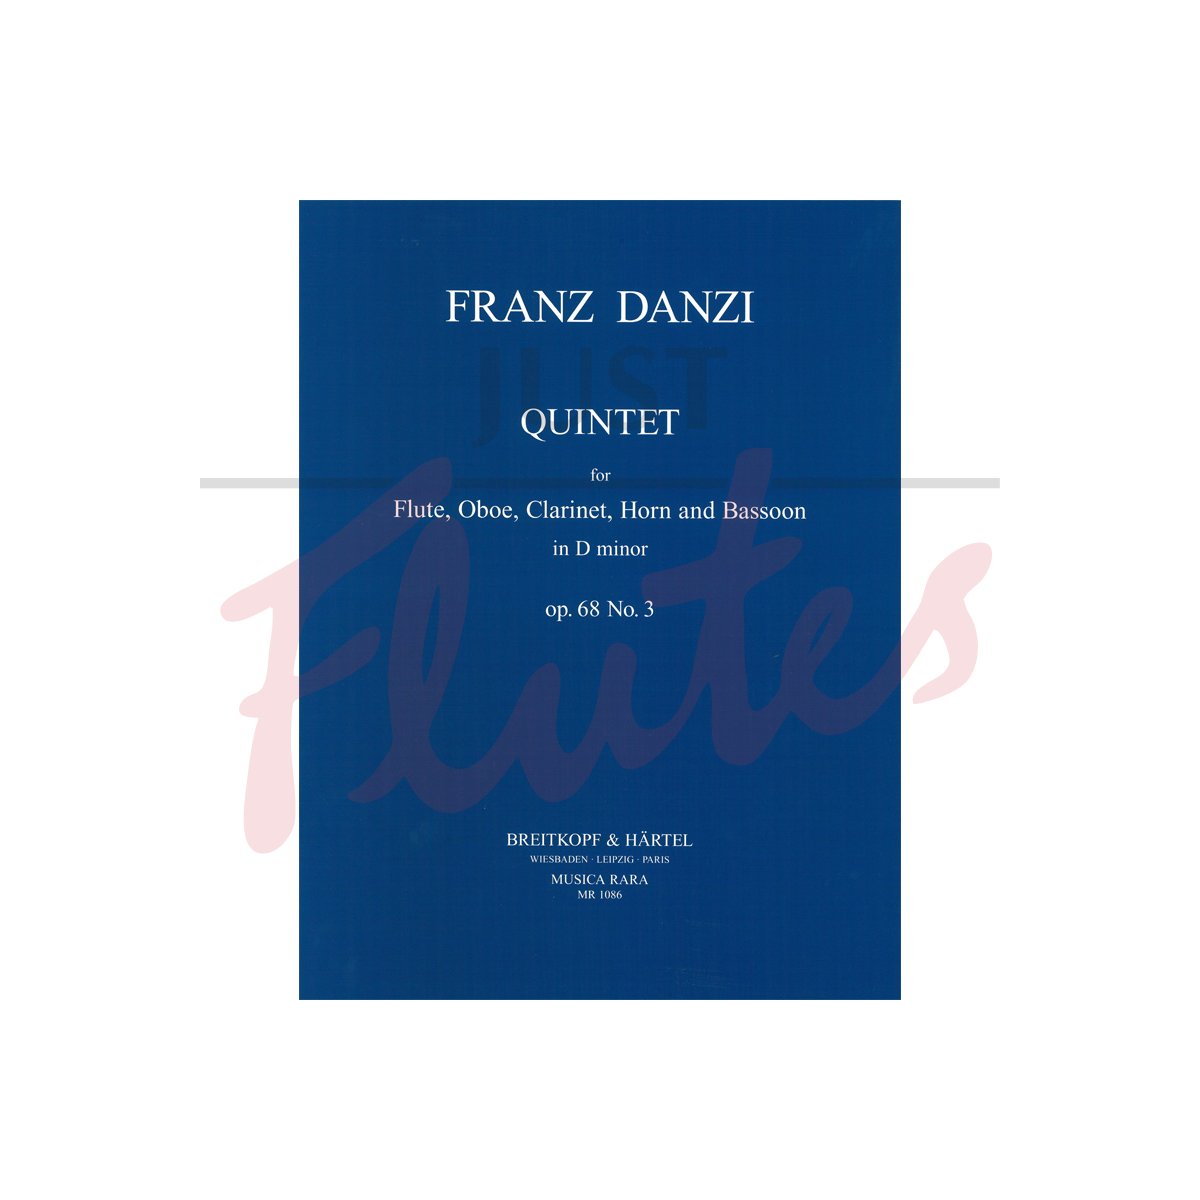 Quintet in D minor for Flute, Oboe, Clarinet, Horn and Bassoon